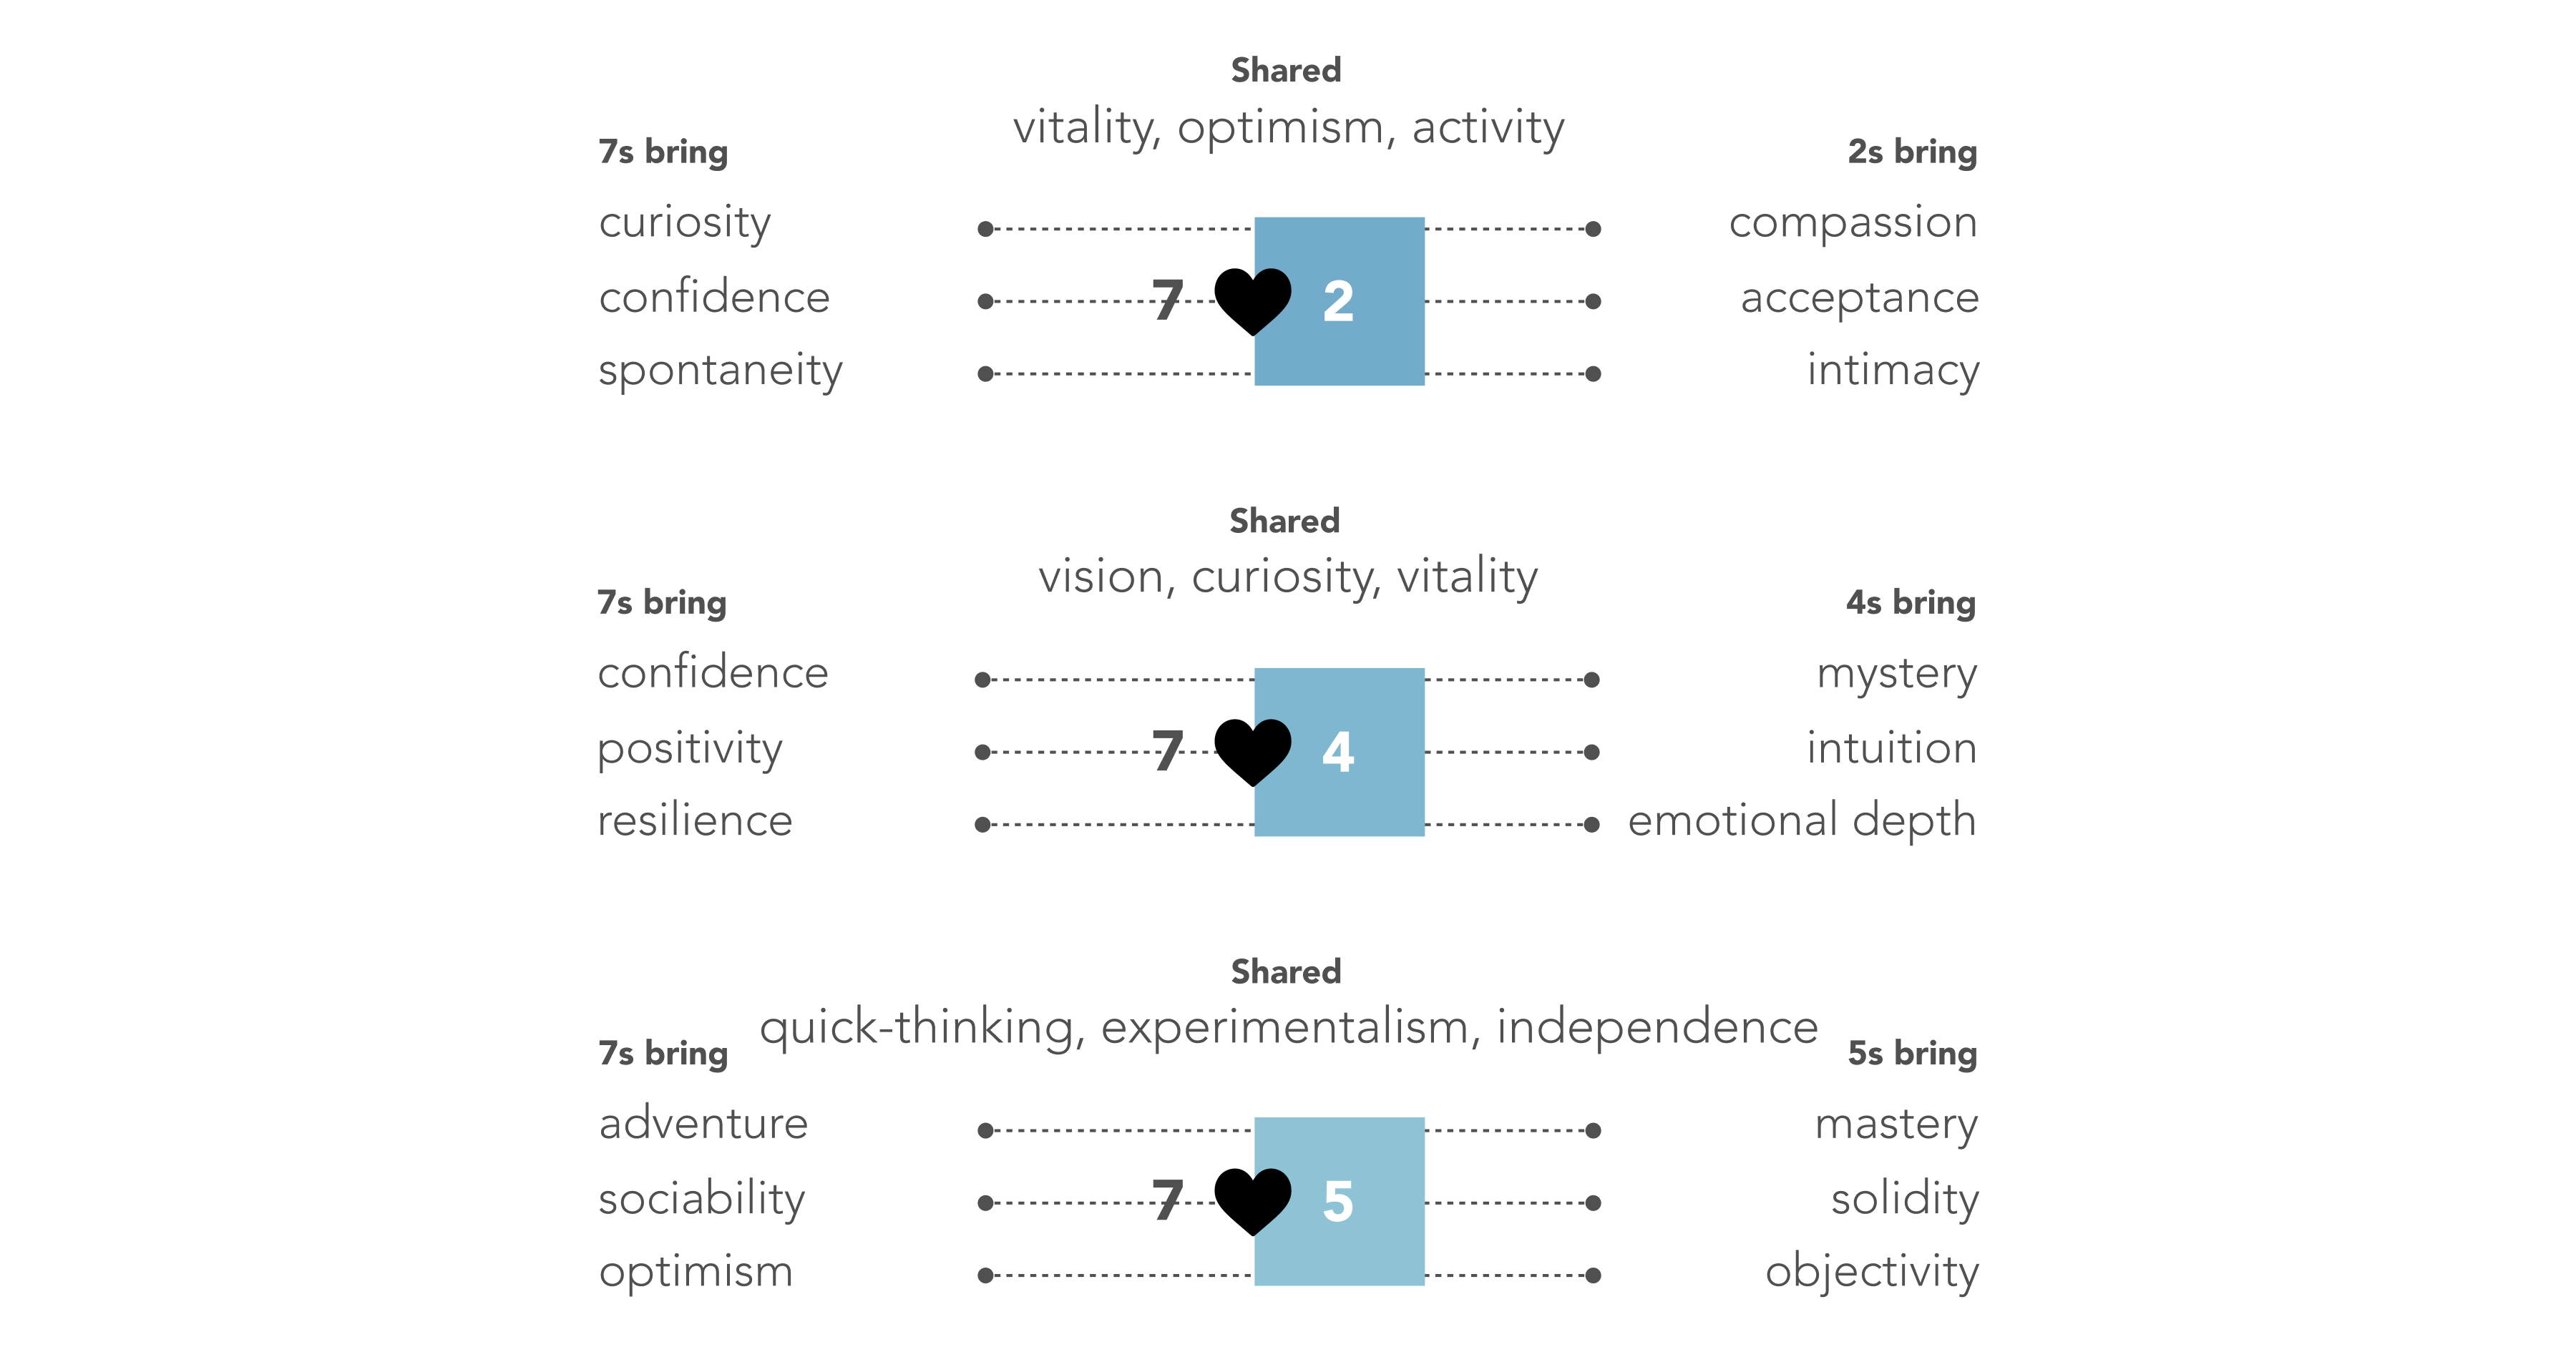 7s and 2s share vitality, optimism, activity. 7s bring curiosity, confidence, spontaneity. 2s bring compassion, acceptance, intimacy. 7s and 4s share vision, curiosity, vitality. 7s bring confidence, positivity, resilience. 4s bring mystery, intuition, emotional depth. 7s and 5s share quick thinking, experimentalism, independence. 7s bring adventure, sociability, optimism. 5s bring mastery, solidity, objectivity.